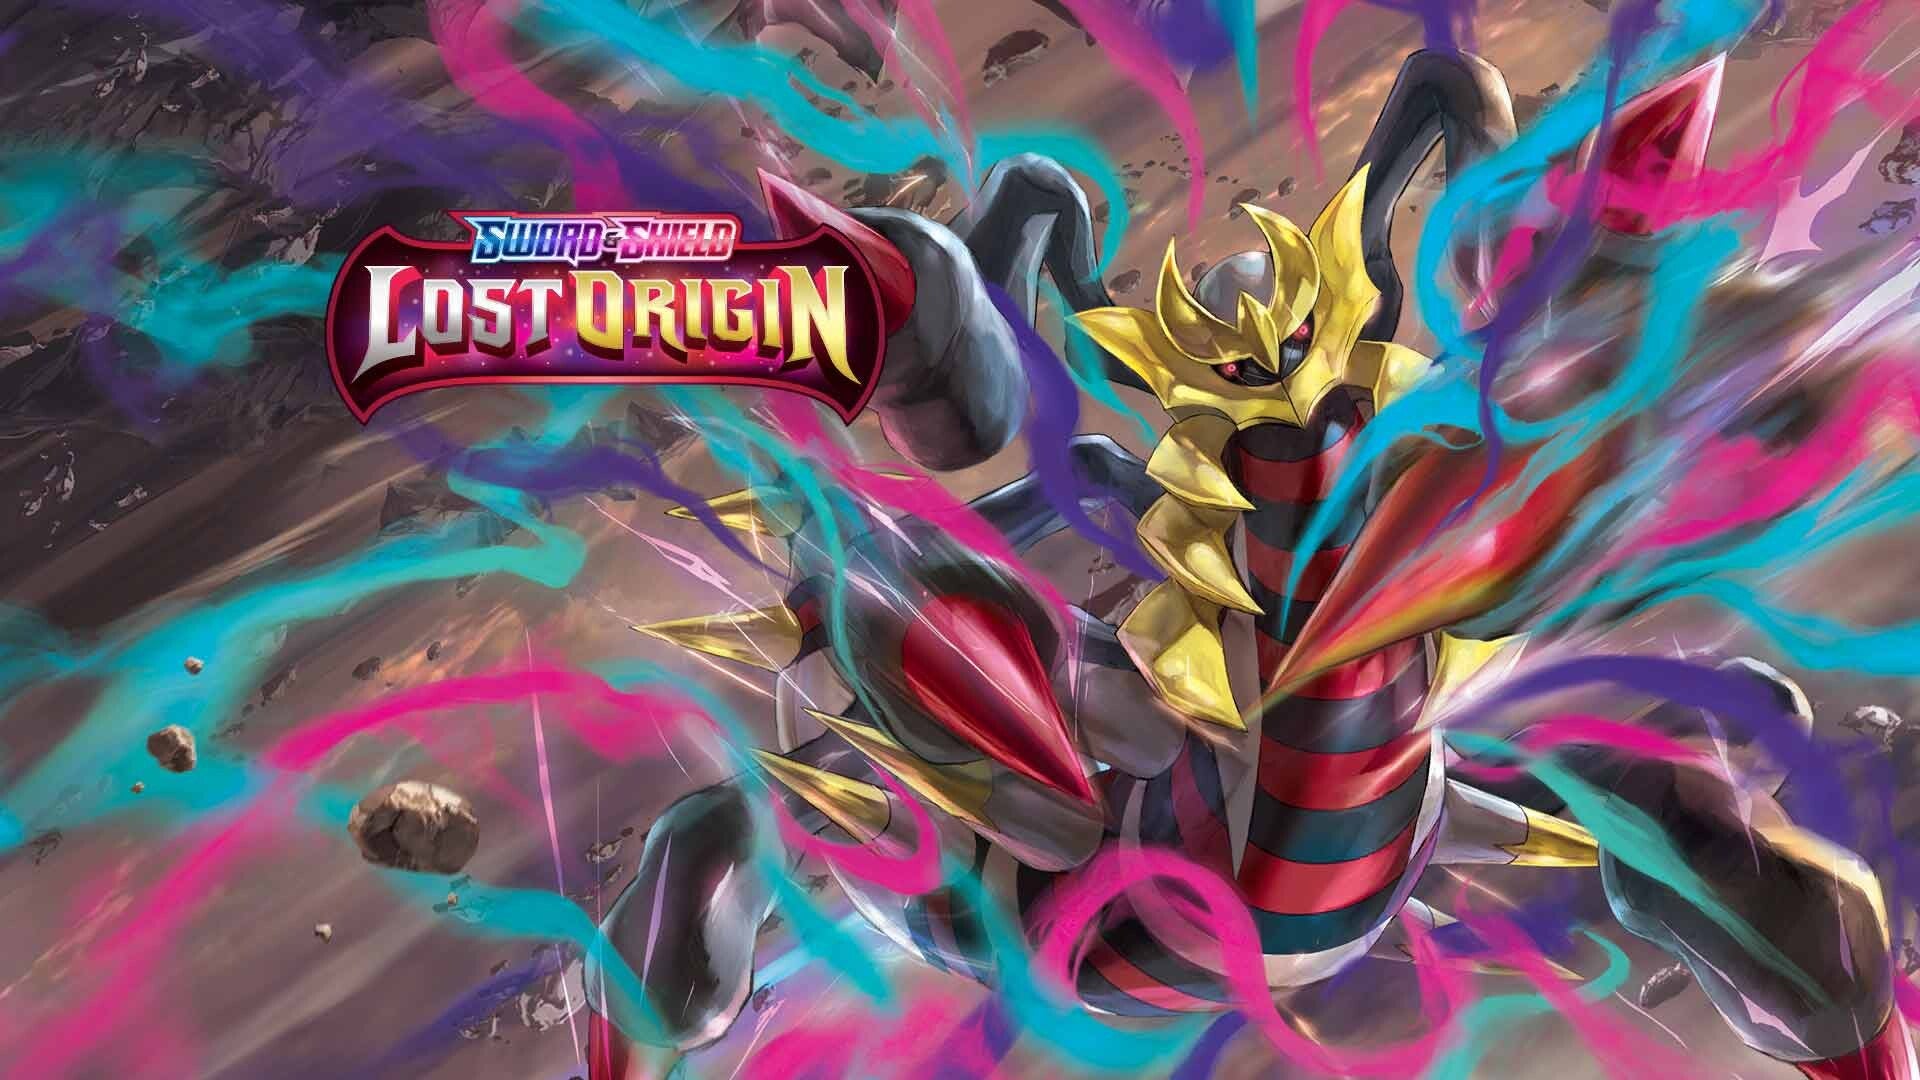 Download lost origin wallpapers we bring you the latest pokãmon tcg news every day